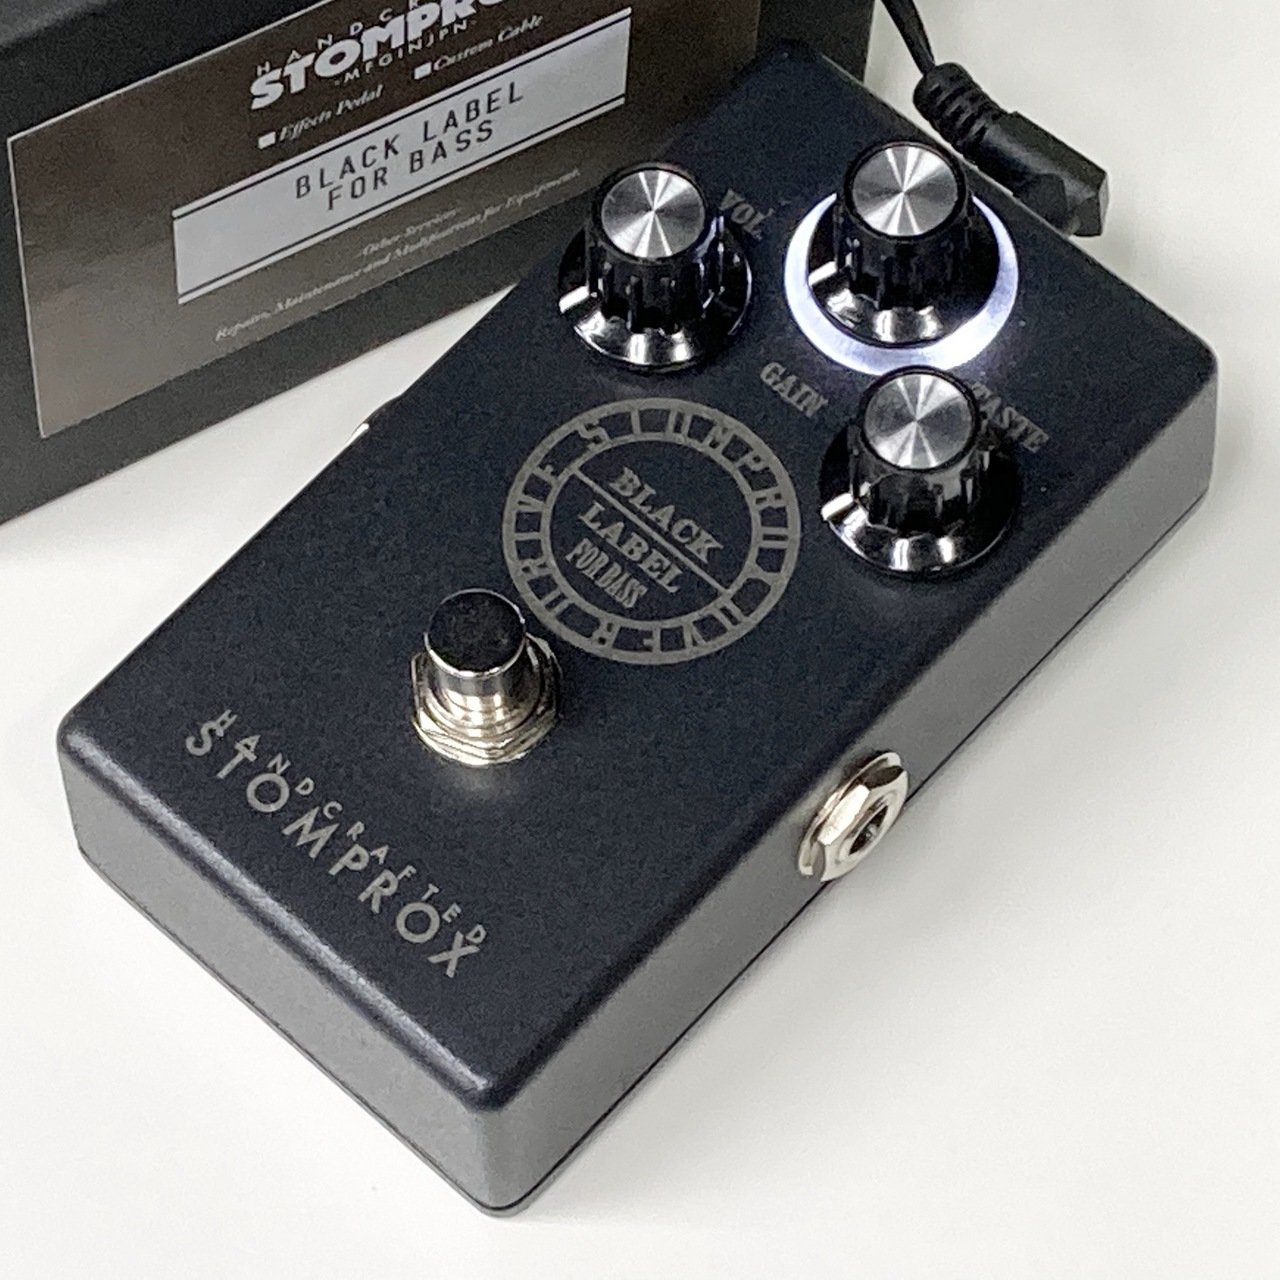 Stomprox/BLACK LABEL FOR BASS